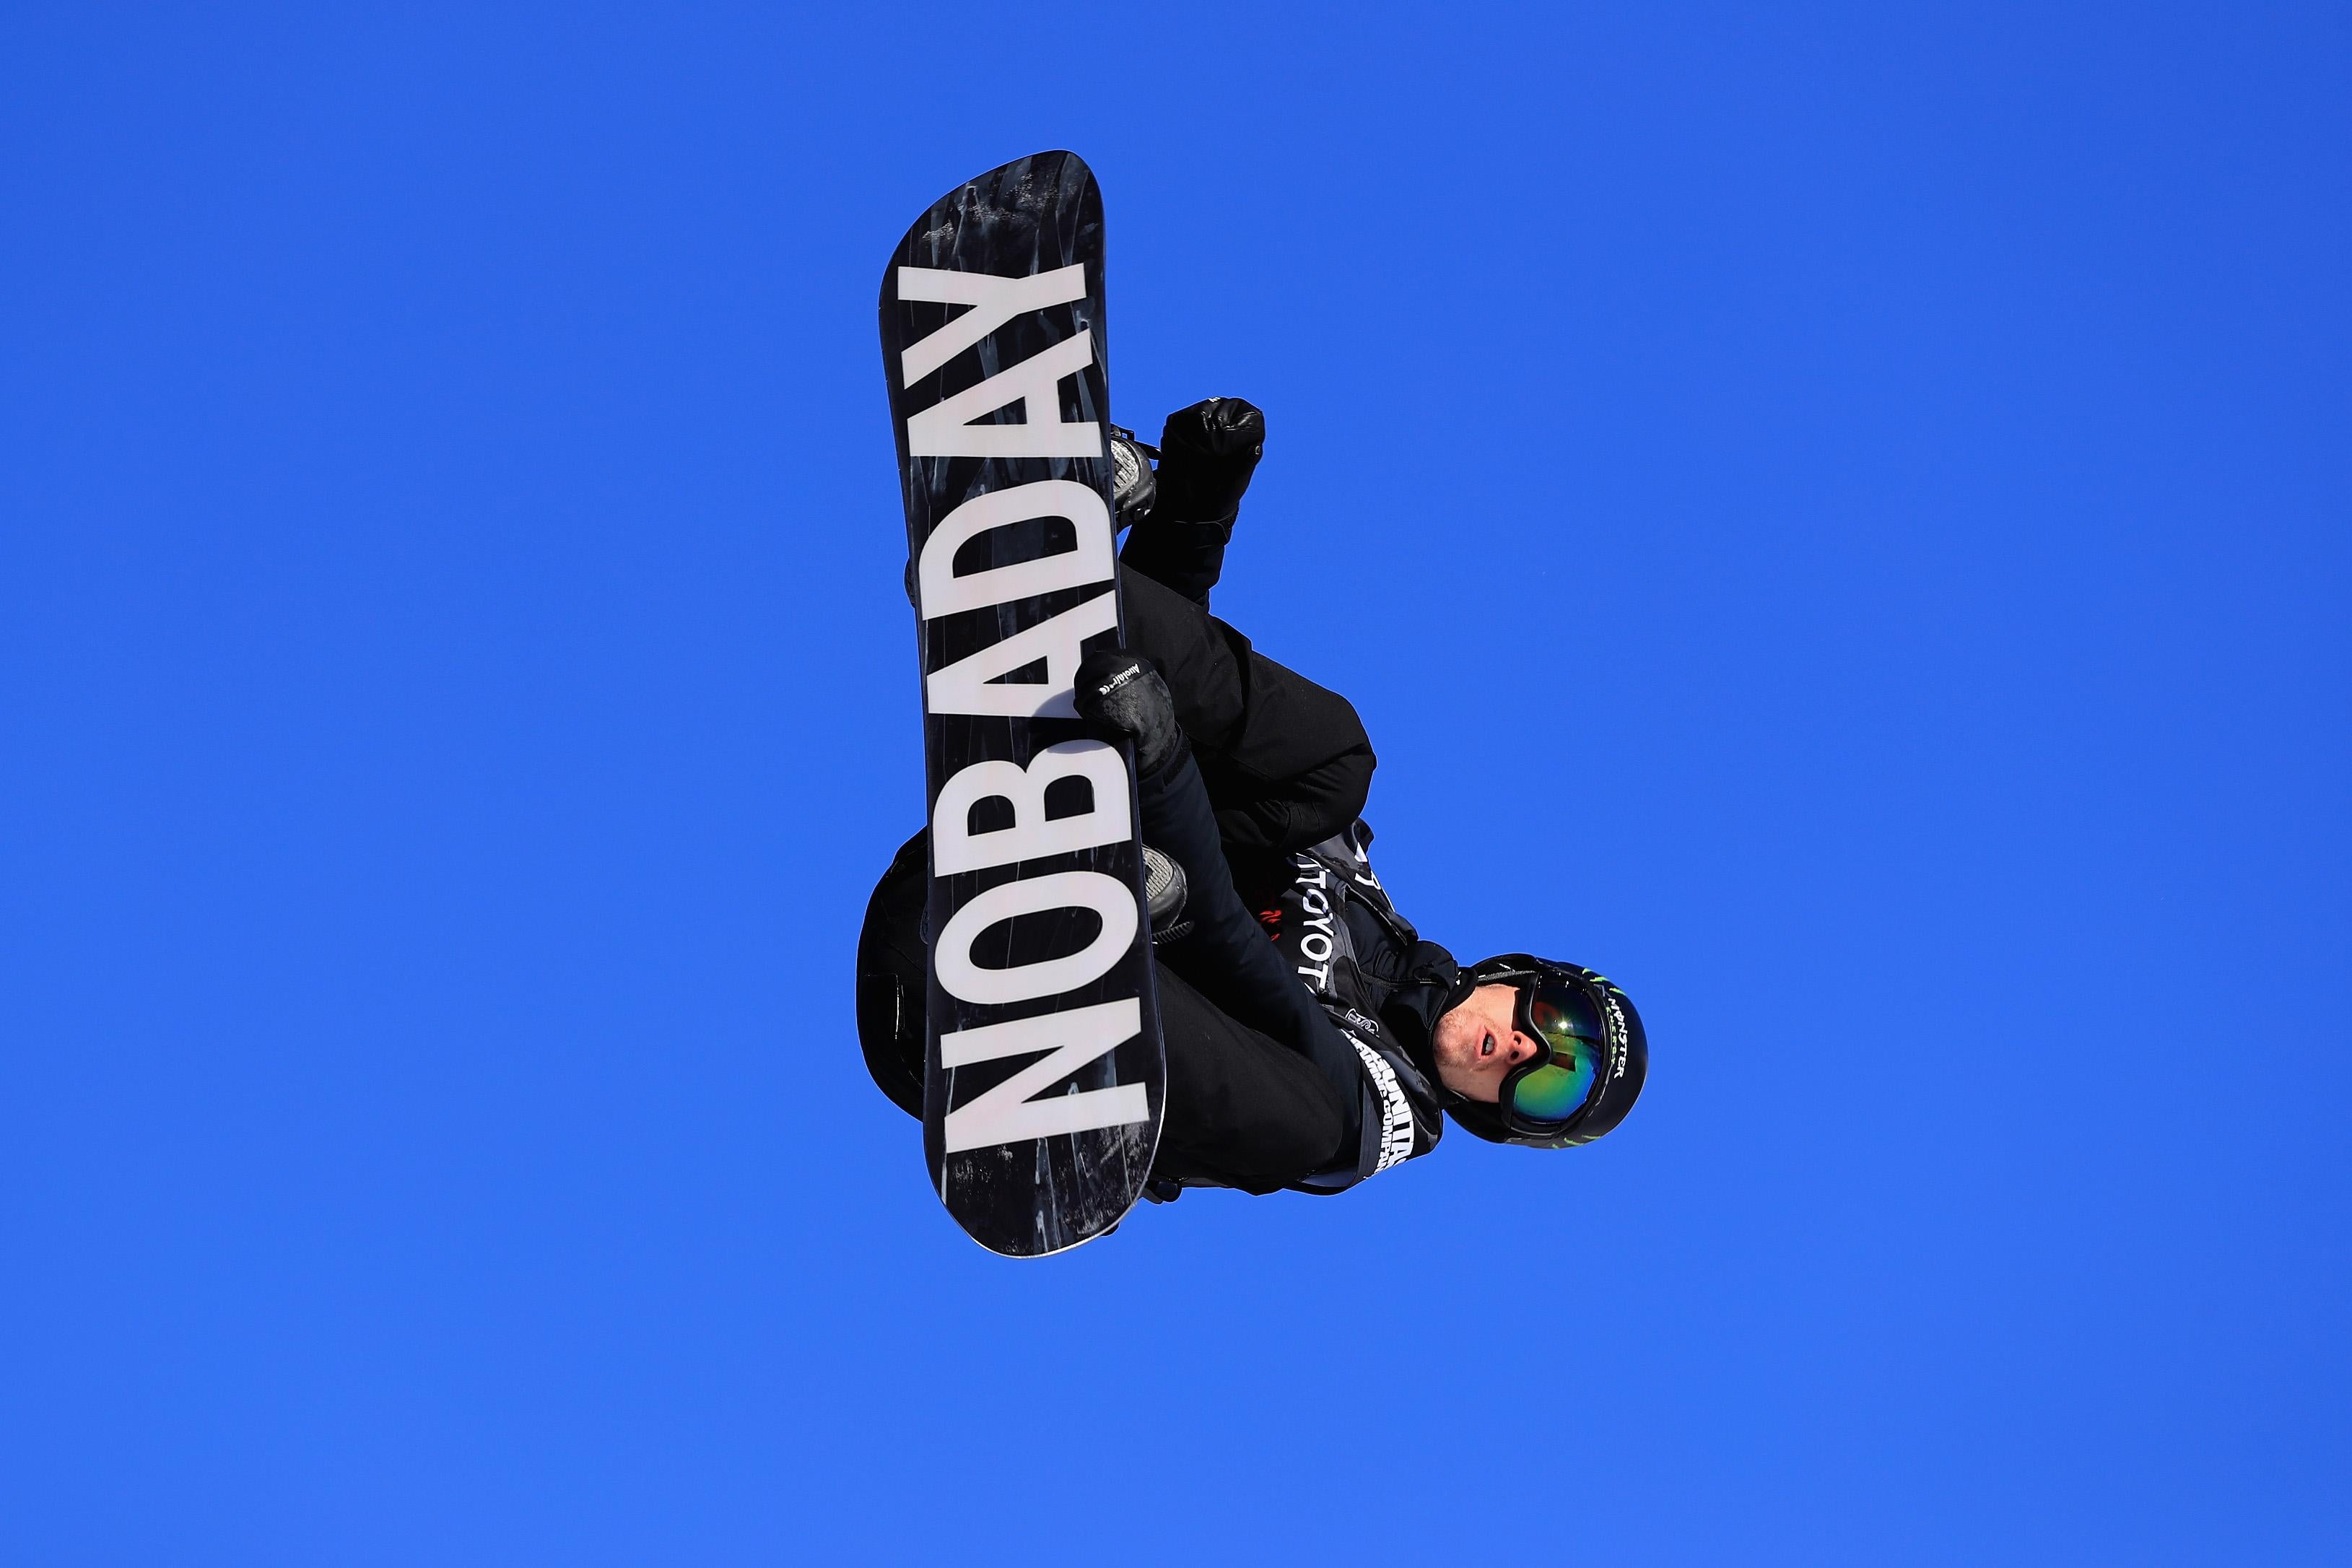 Get to know the new Olympic event of big air snowboarding.